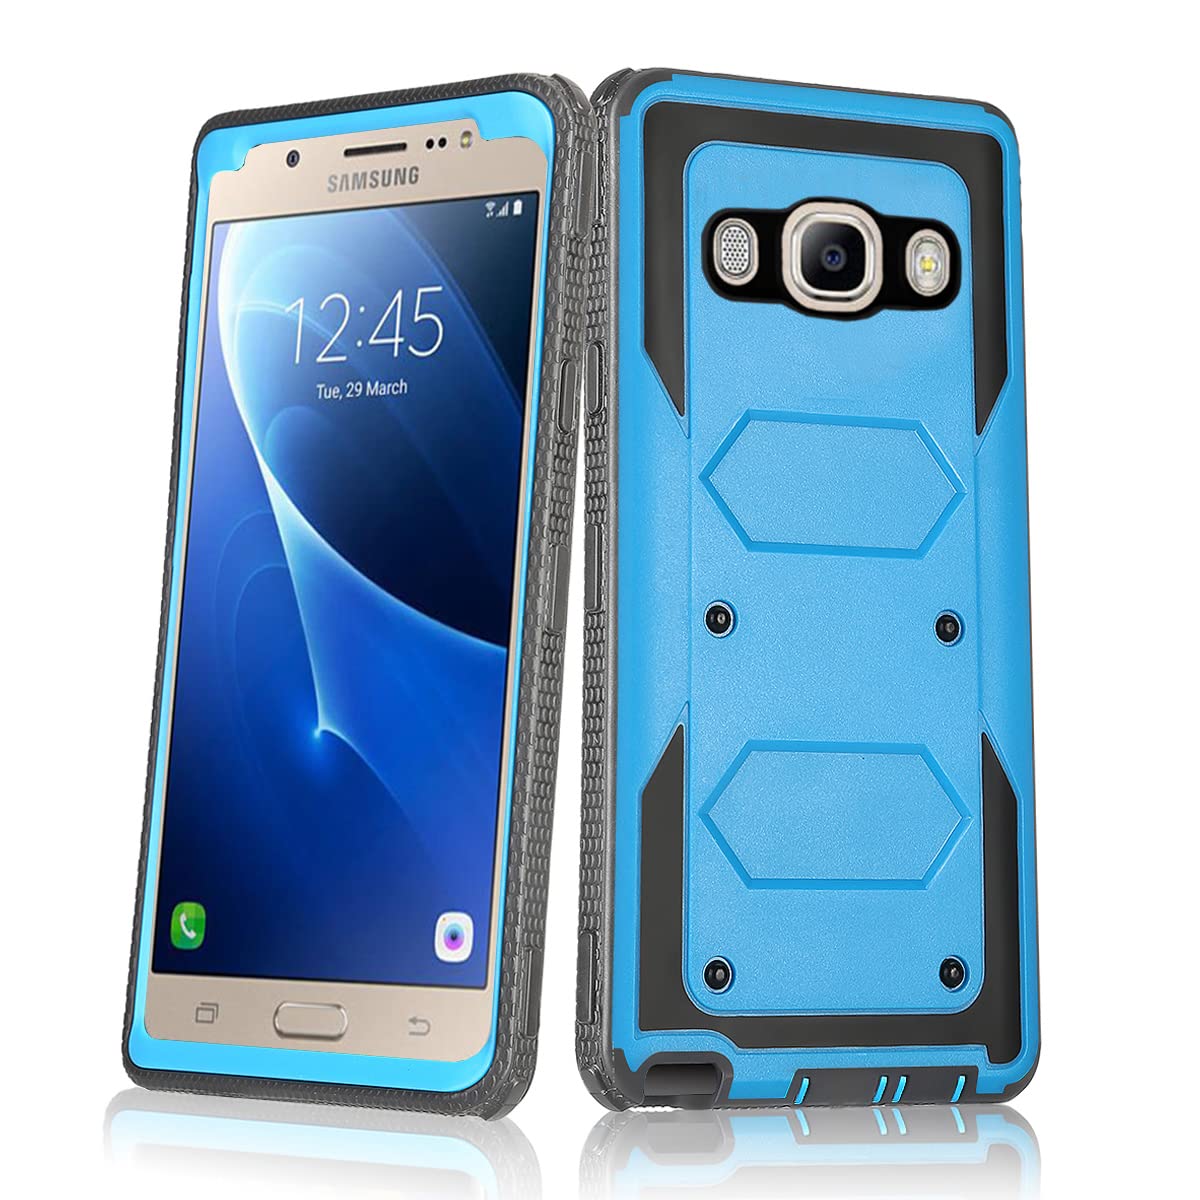 Asuwish Phone Case for Samsung Galaxy J7 2016 Cover Hybrid Rugged Shockproof Hard Drop Proof Full Body Protective Heavy Duty Mobile Dual 3 Layer Slim Cell Accessories Glaxay J 7 J710 Women Men Blue